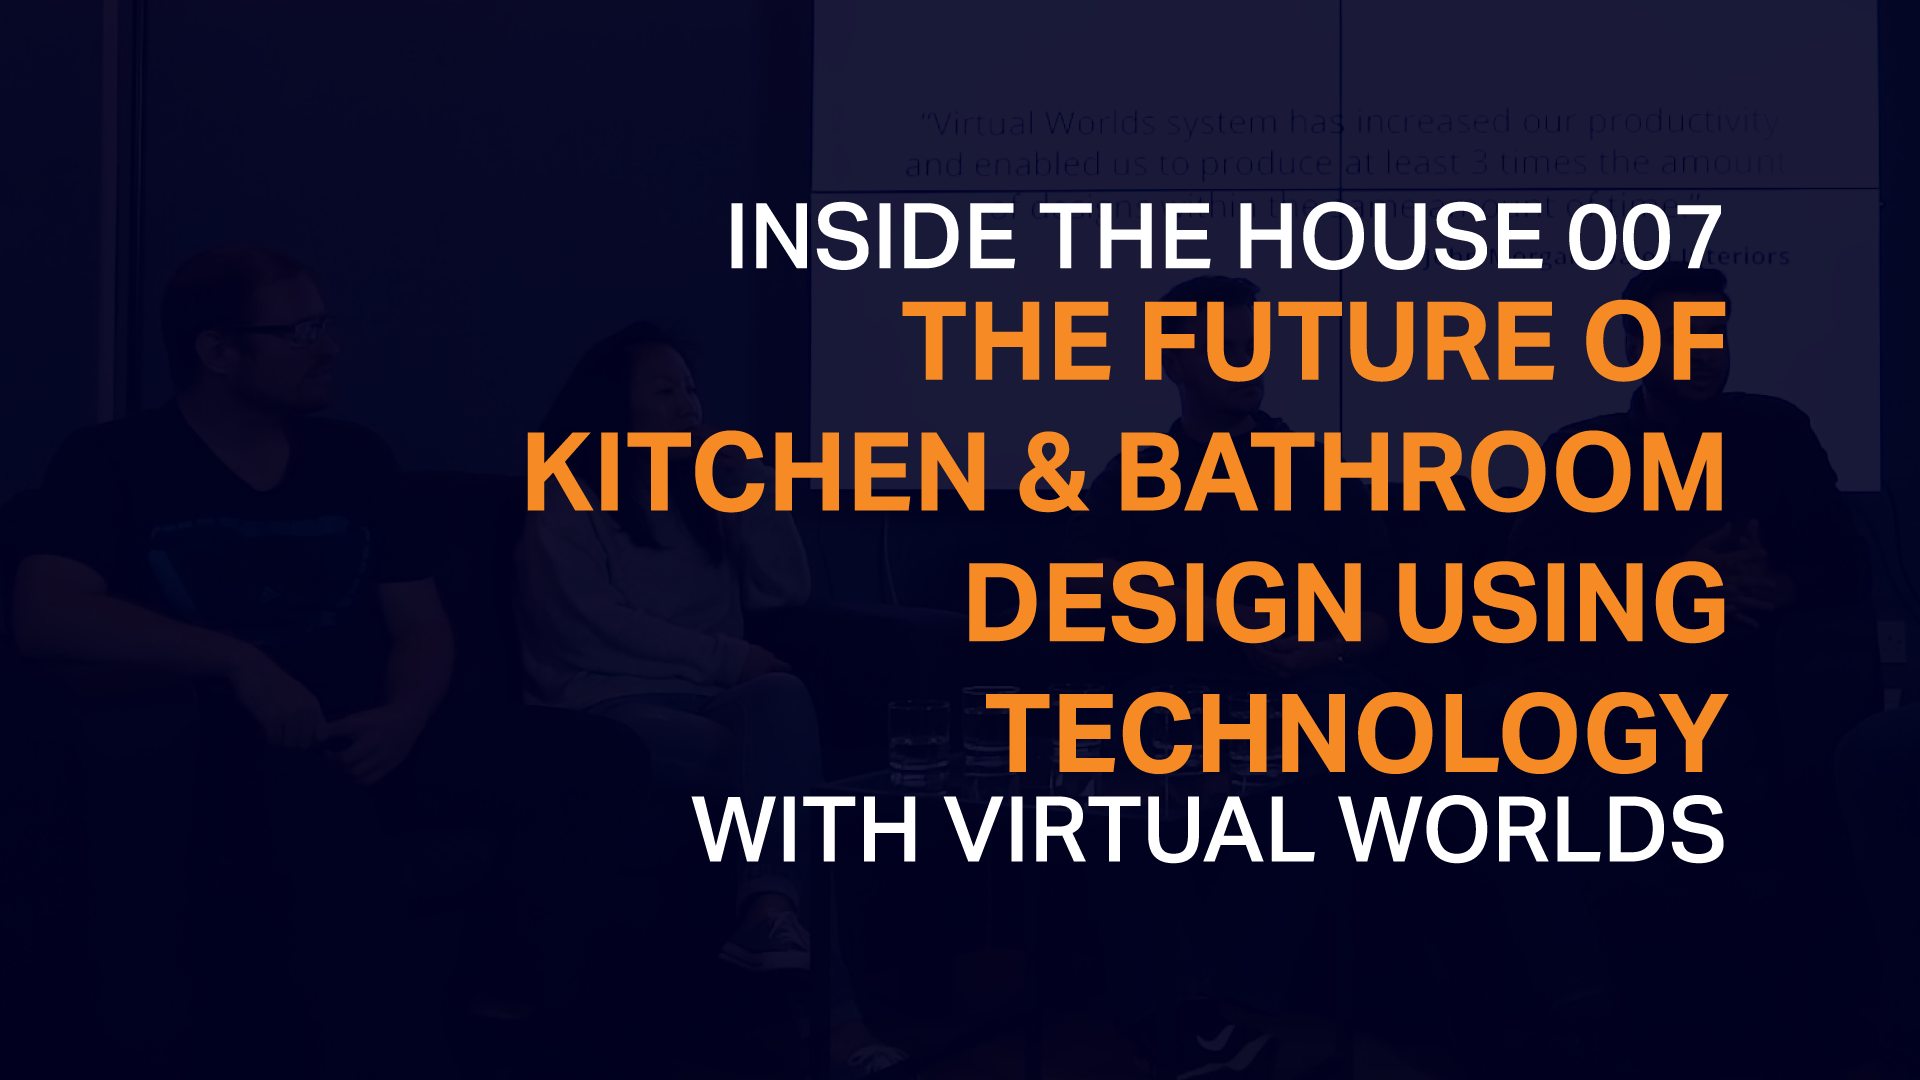 007 The Future of Kitchen & Bathroom Design Using Technology